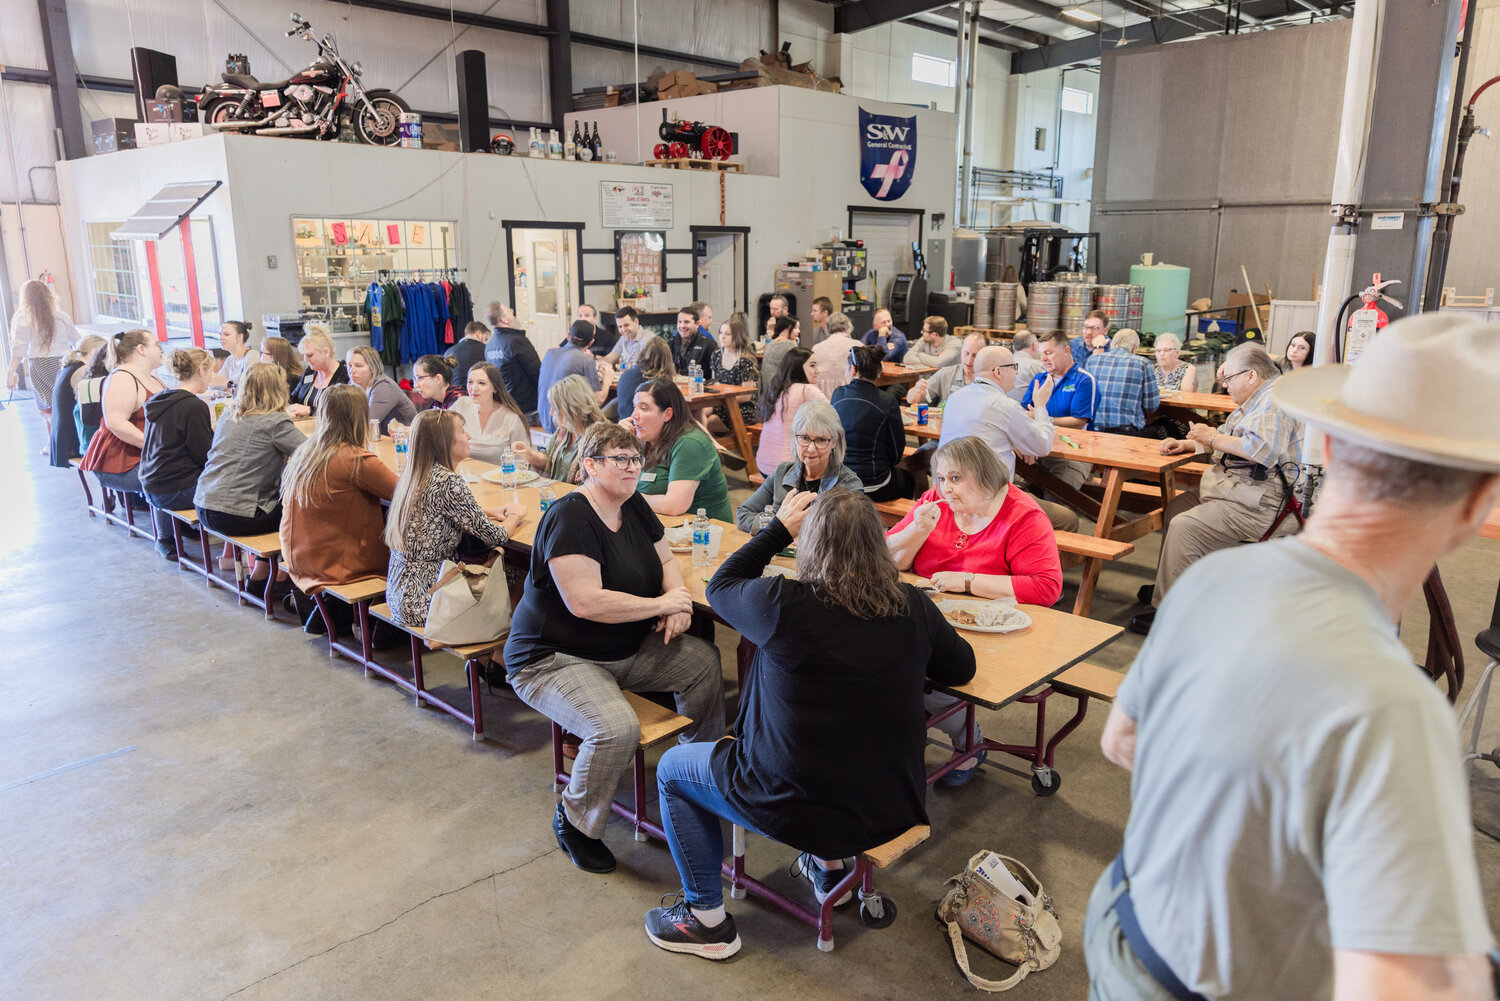 Attendees mingle and munch during the annual member barbecue hosted by the Centralia-Chehalis Chamber of Commerce at Dick’s Brewing on Thursday, Sept. 14, in Centralia. The food was provided by Lucky Eagle Casino and Hotel while the space for the event was provided by Dick’s Brewing.